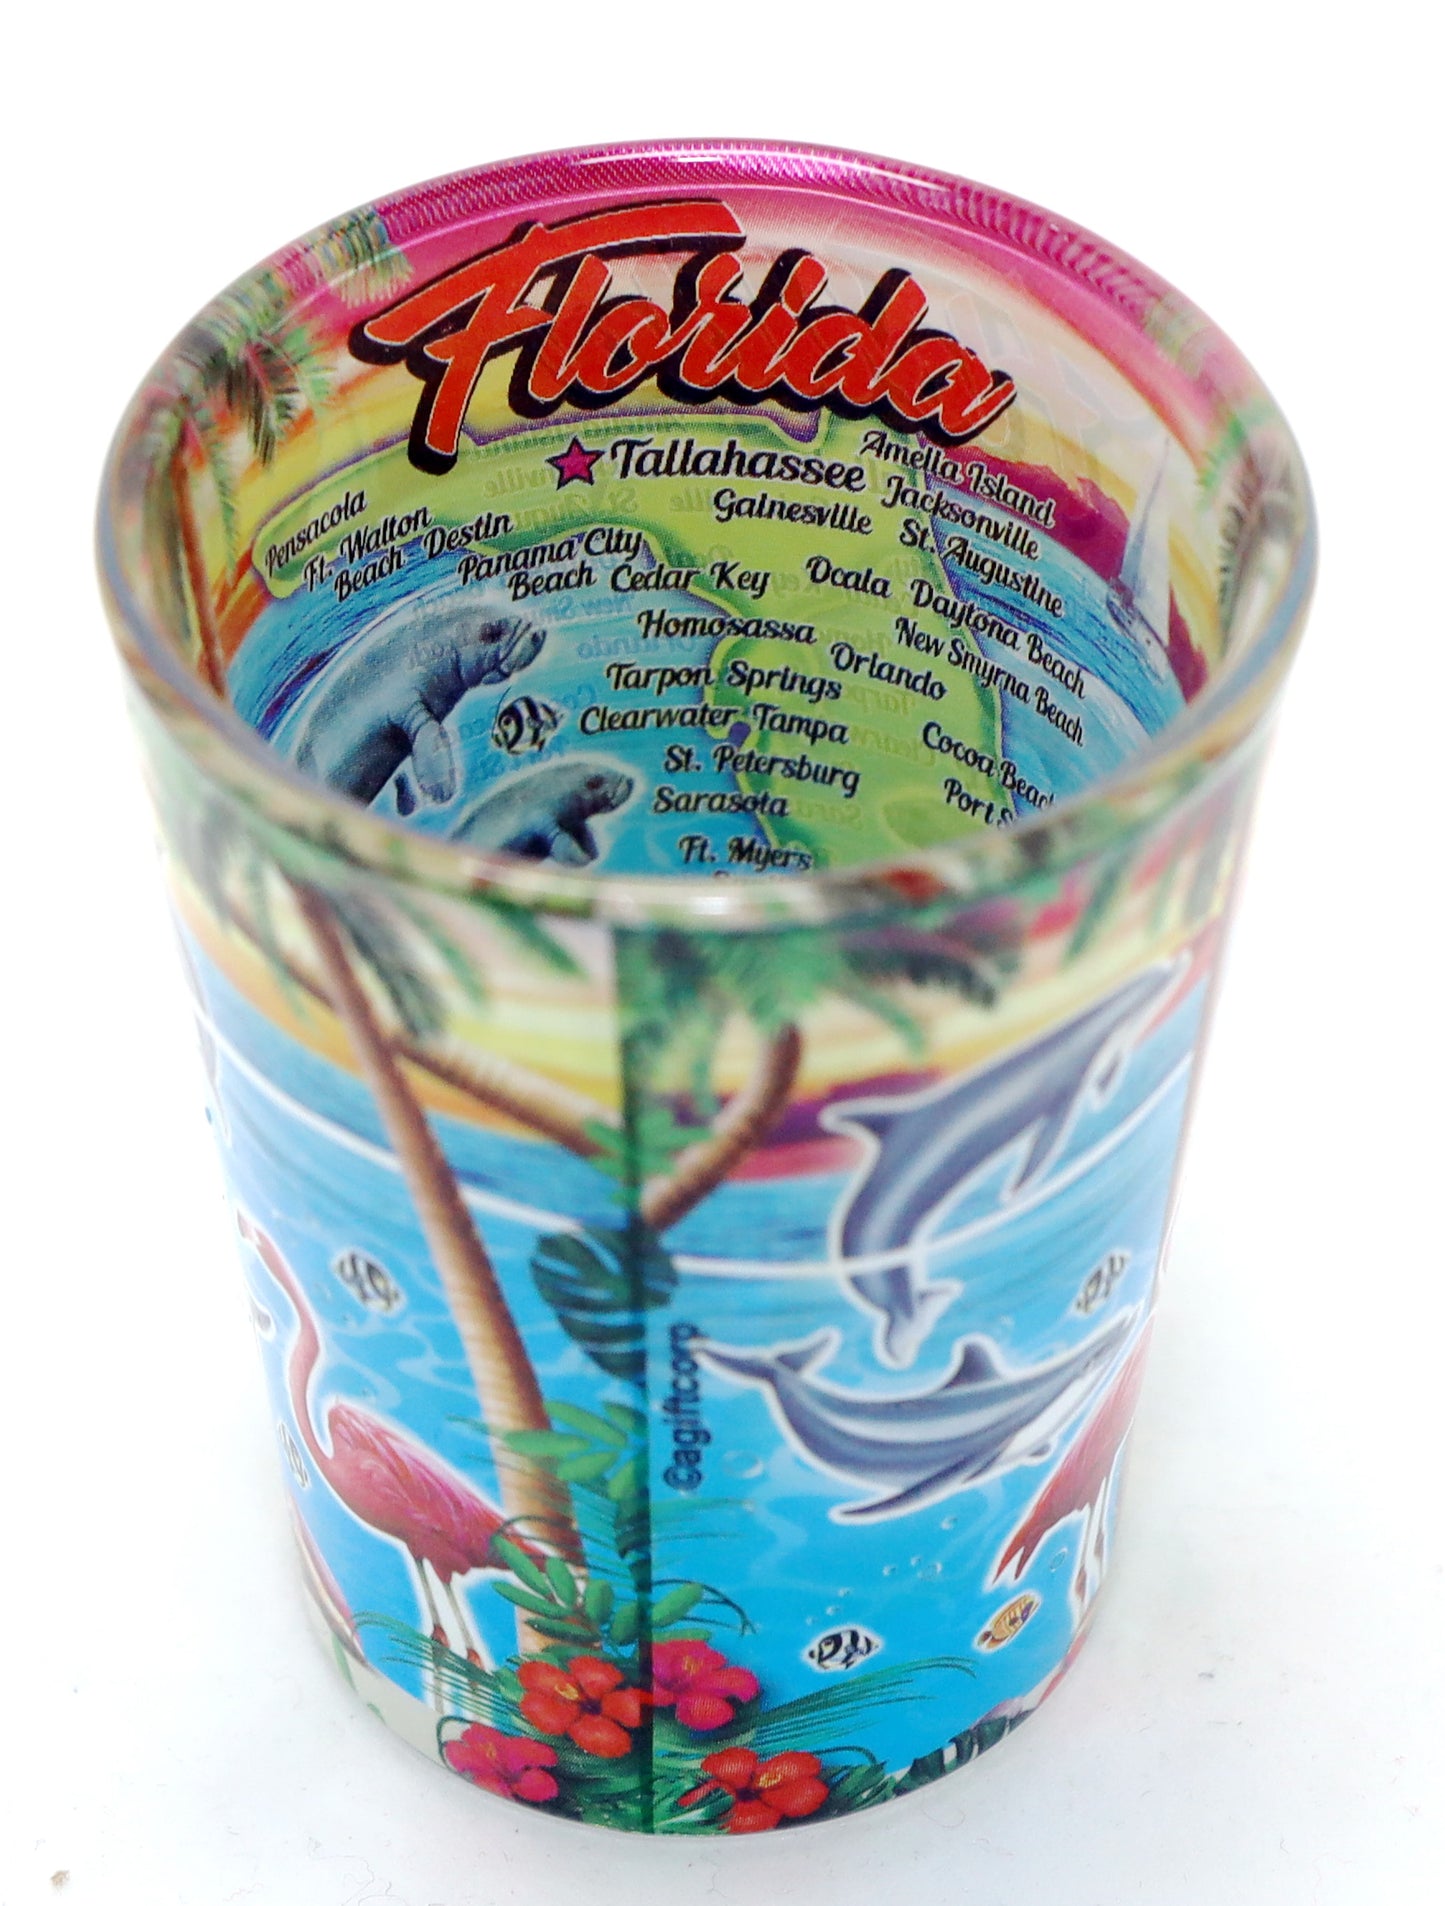 Florida Map In and Out Shot Glass